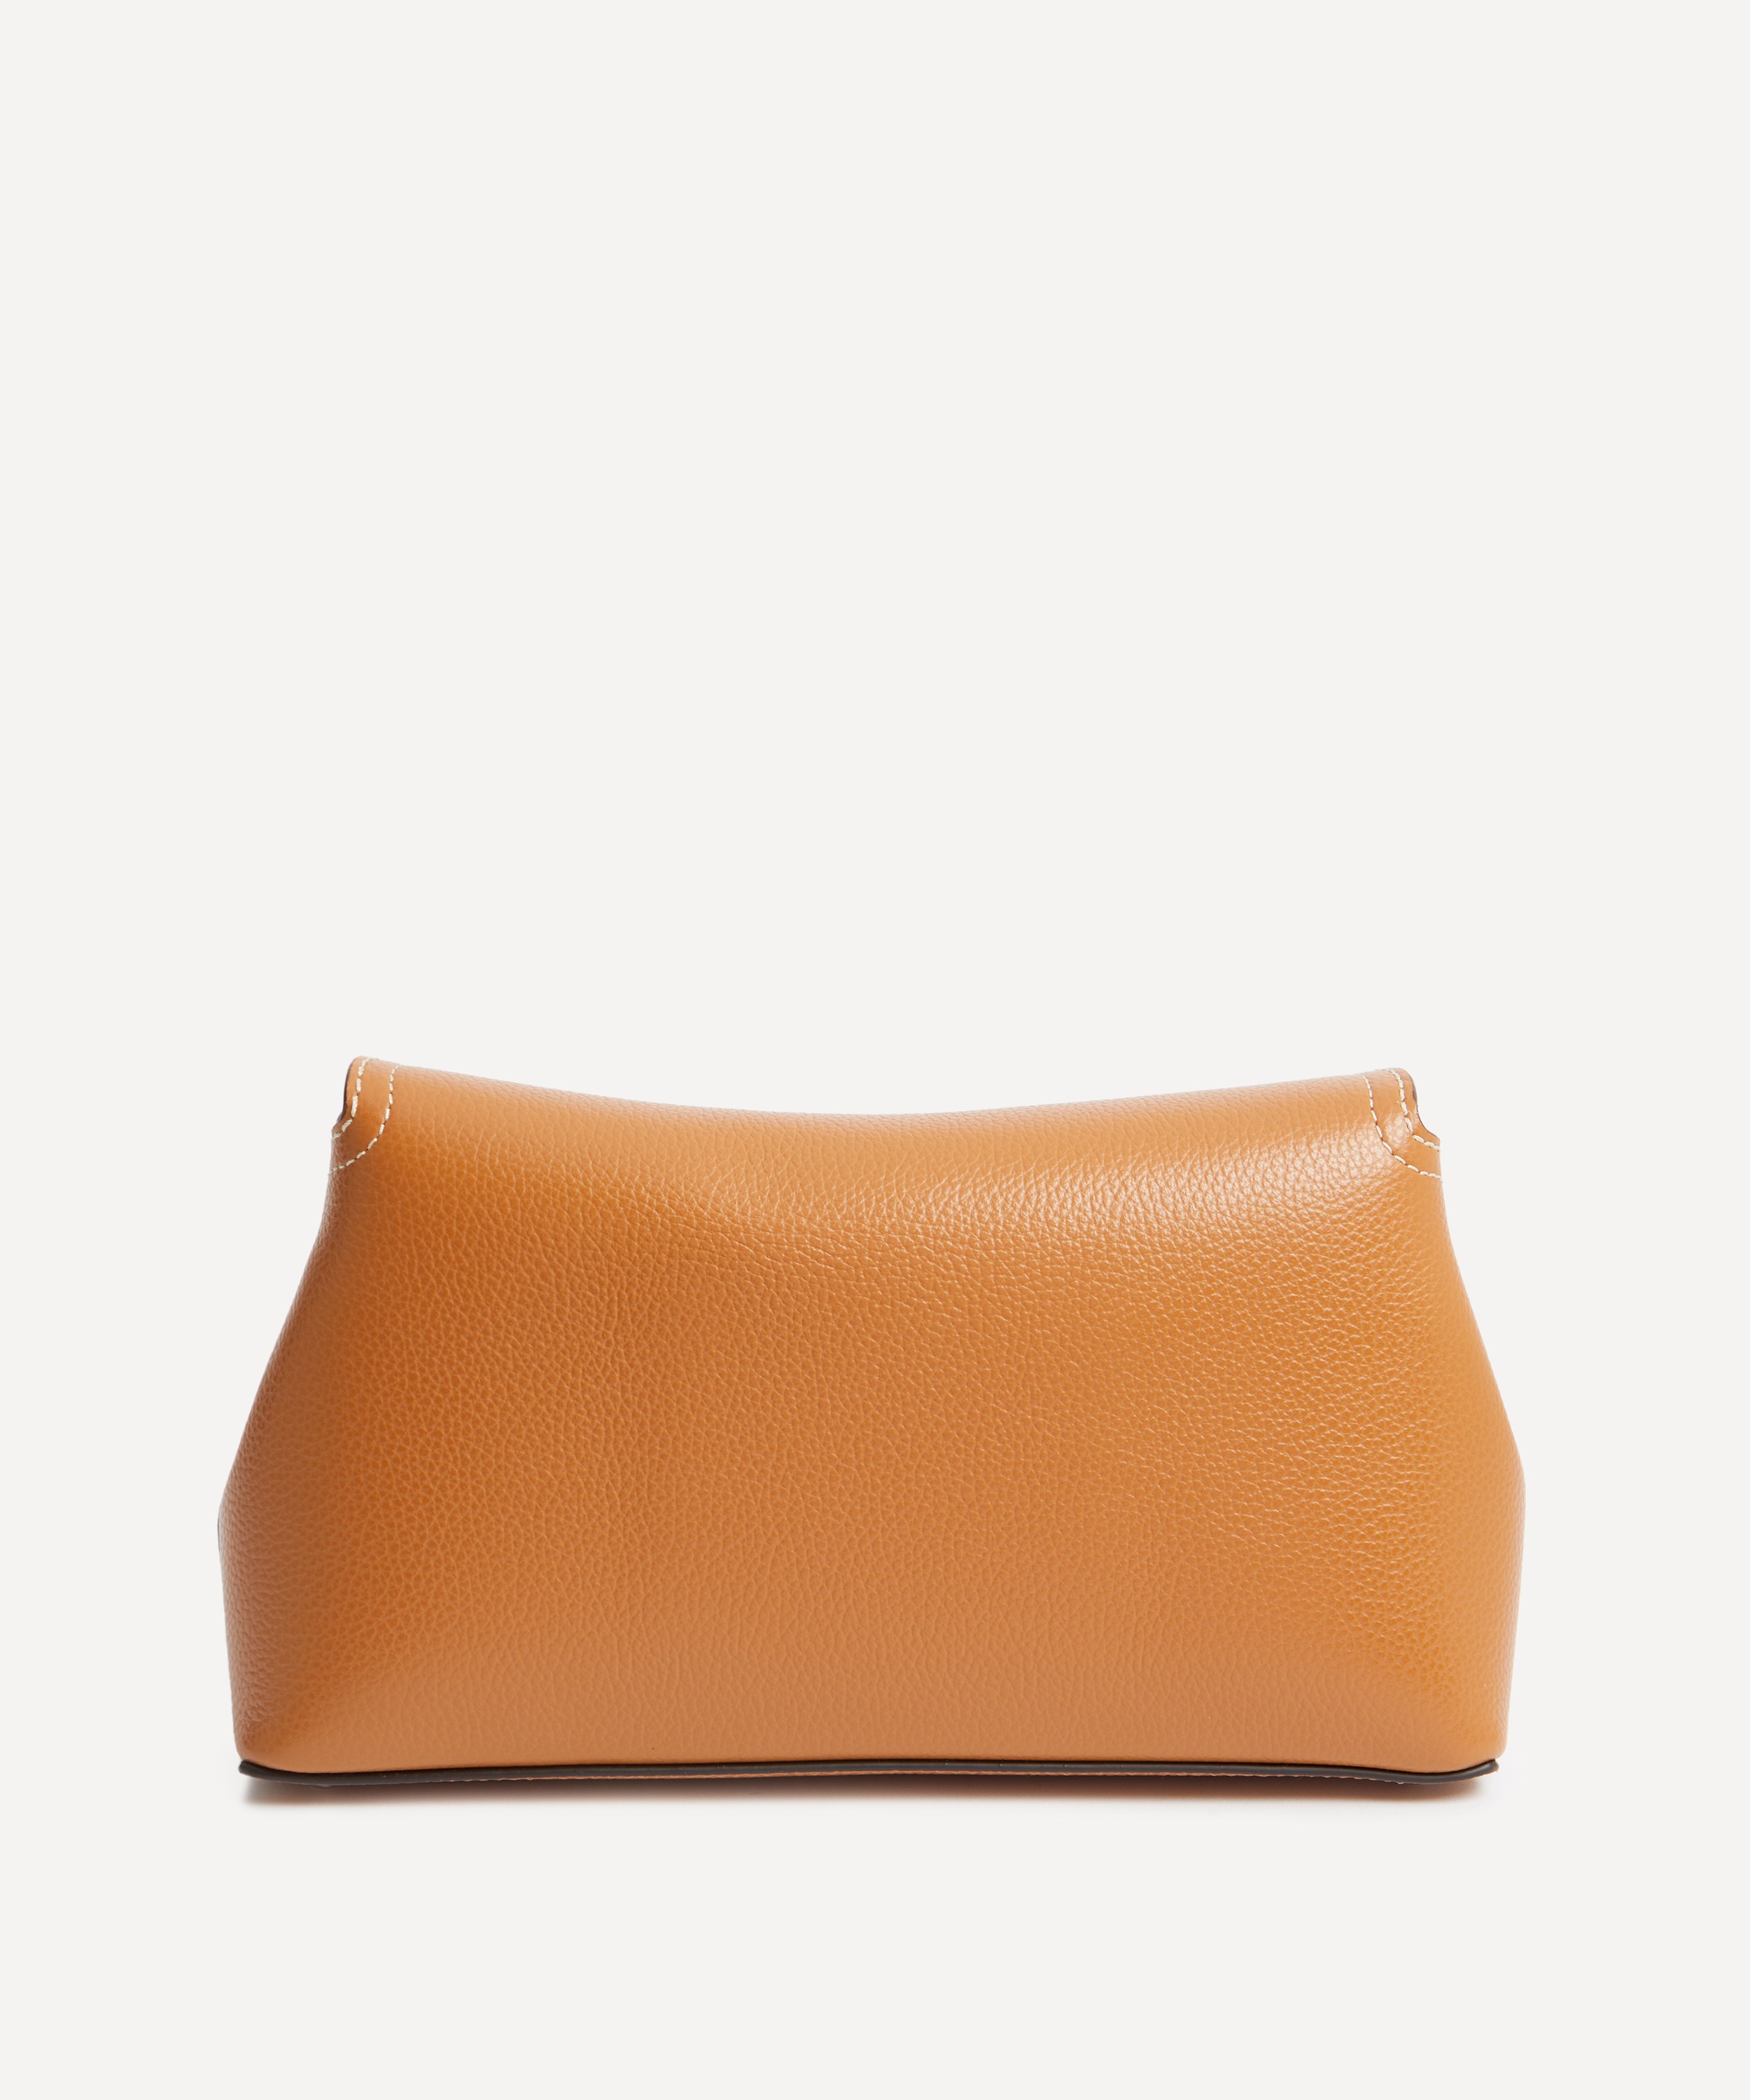 Toteme - T-Lock Tan Leather Clutch image number 3